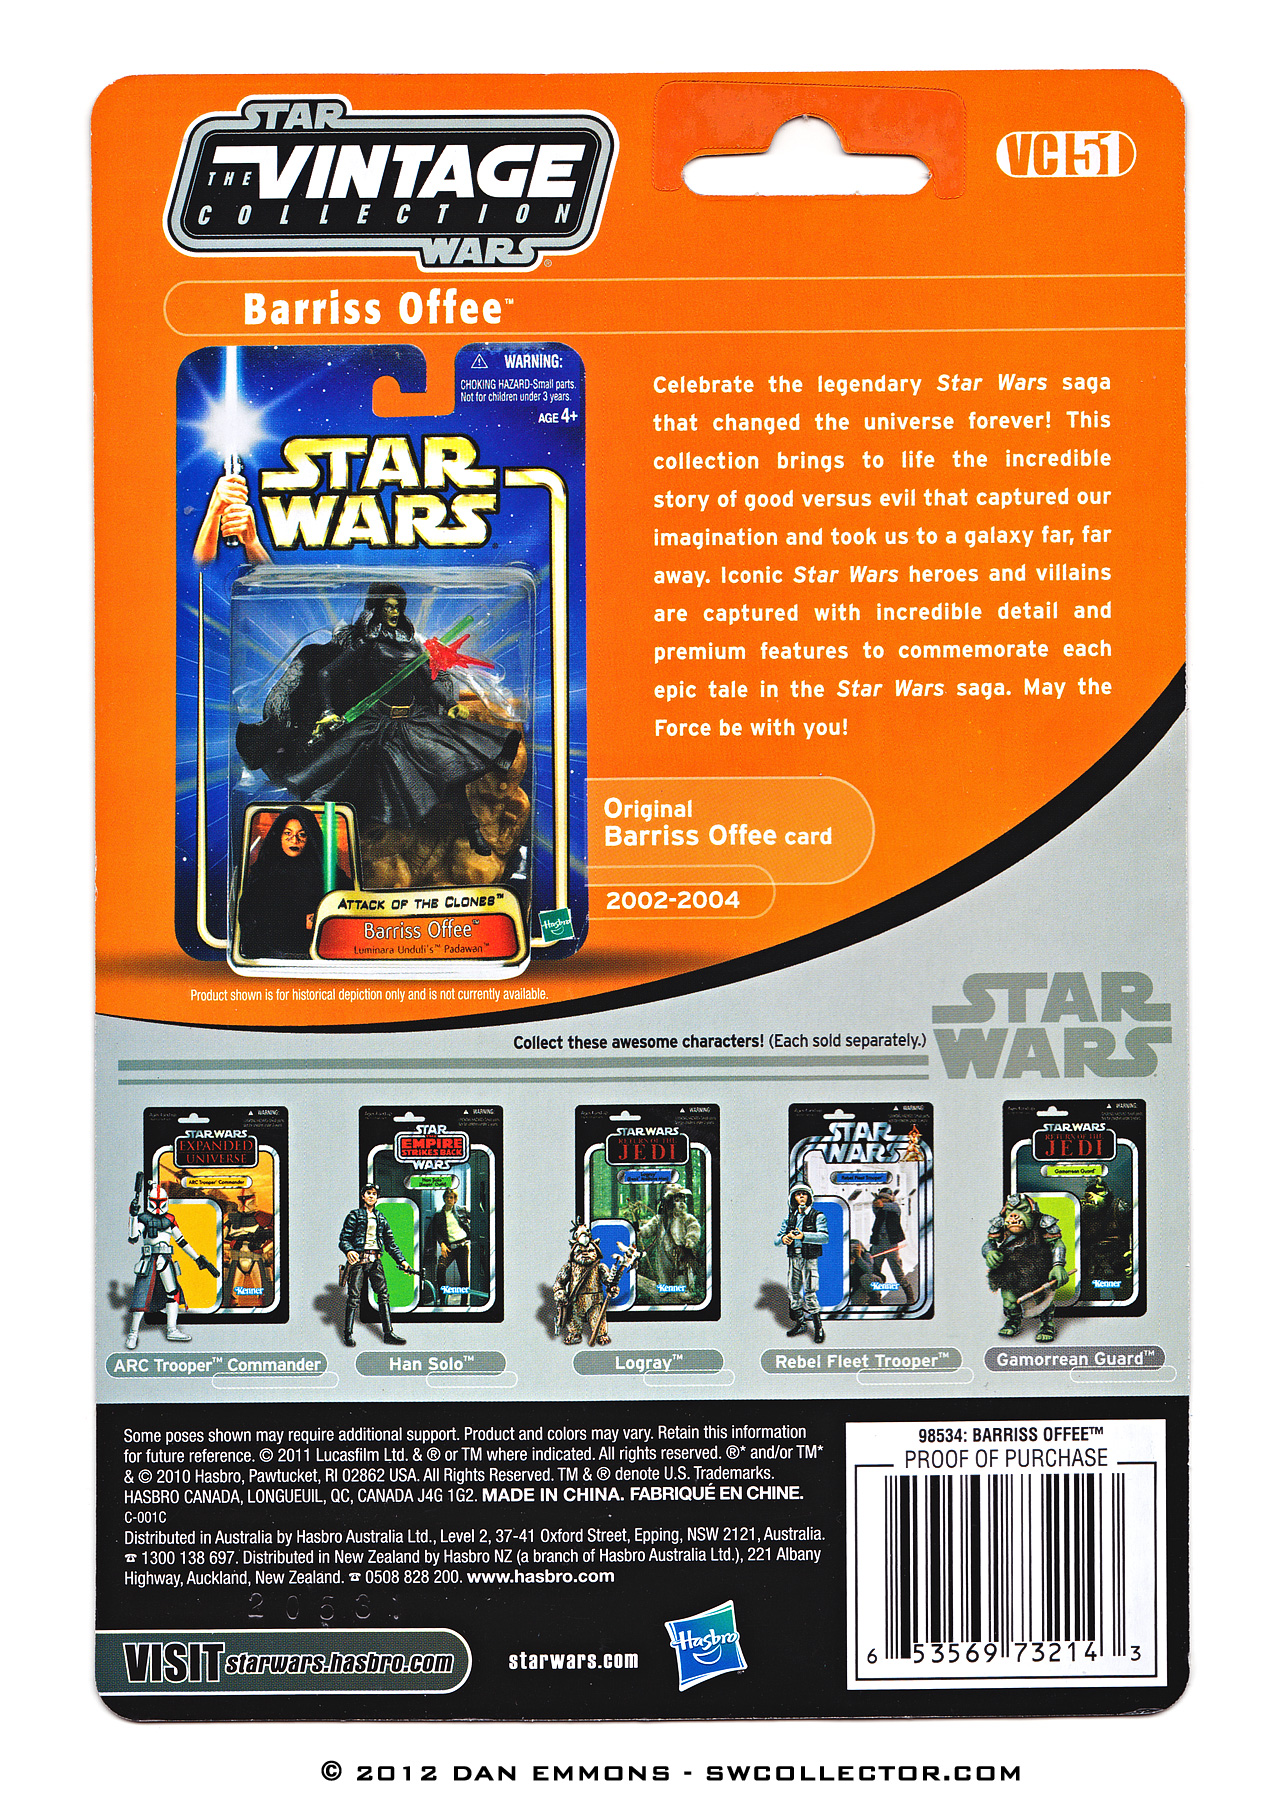 The Vintage Collection - VC51: Barriss Offee (Jedi Padawan) - Variation UPC 6 53569 73214 3